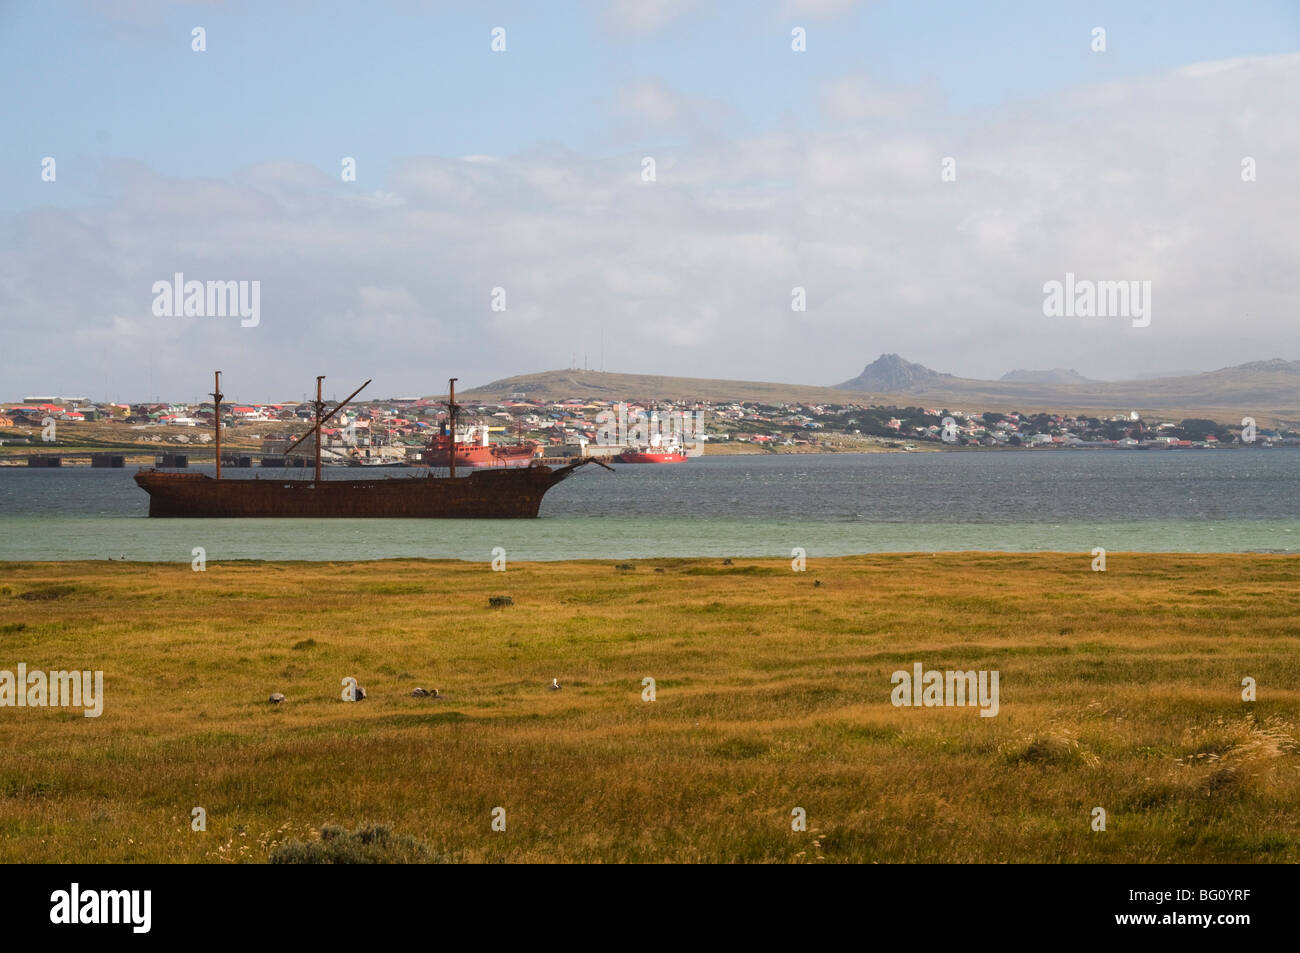 The Lady Elizabeth, an old sailing ship that ran aground, Port Stanley, Falkland Islands, South America Stock Photo